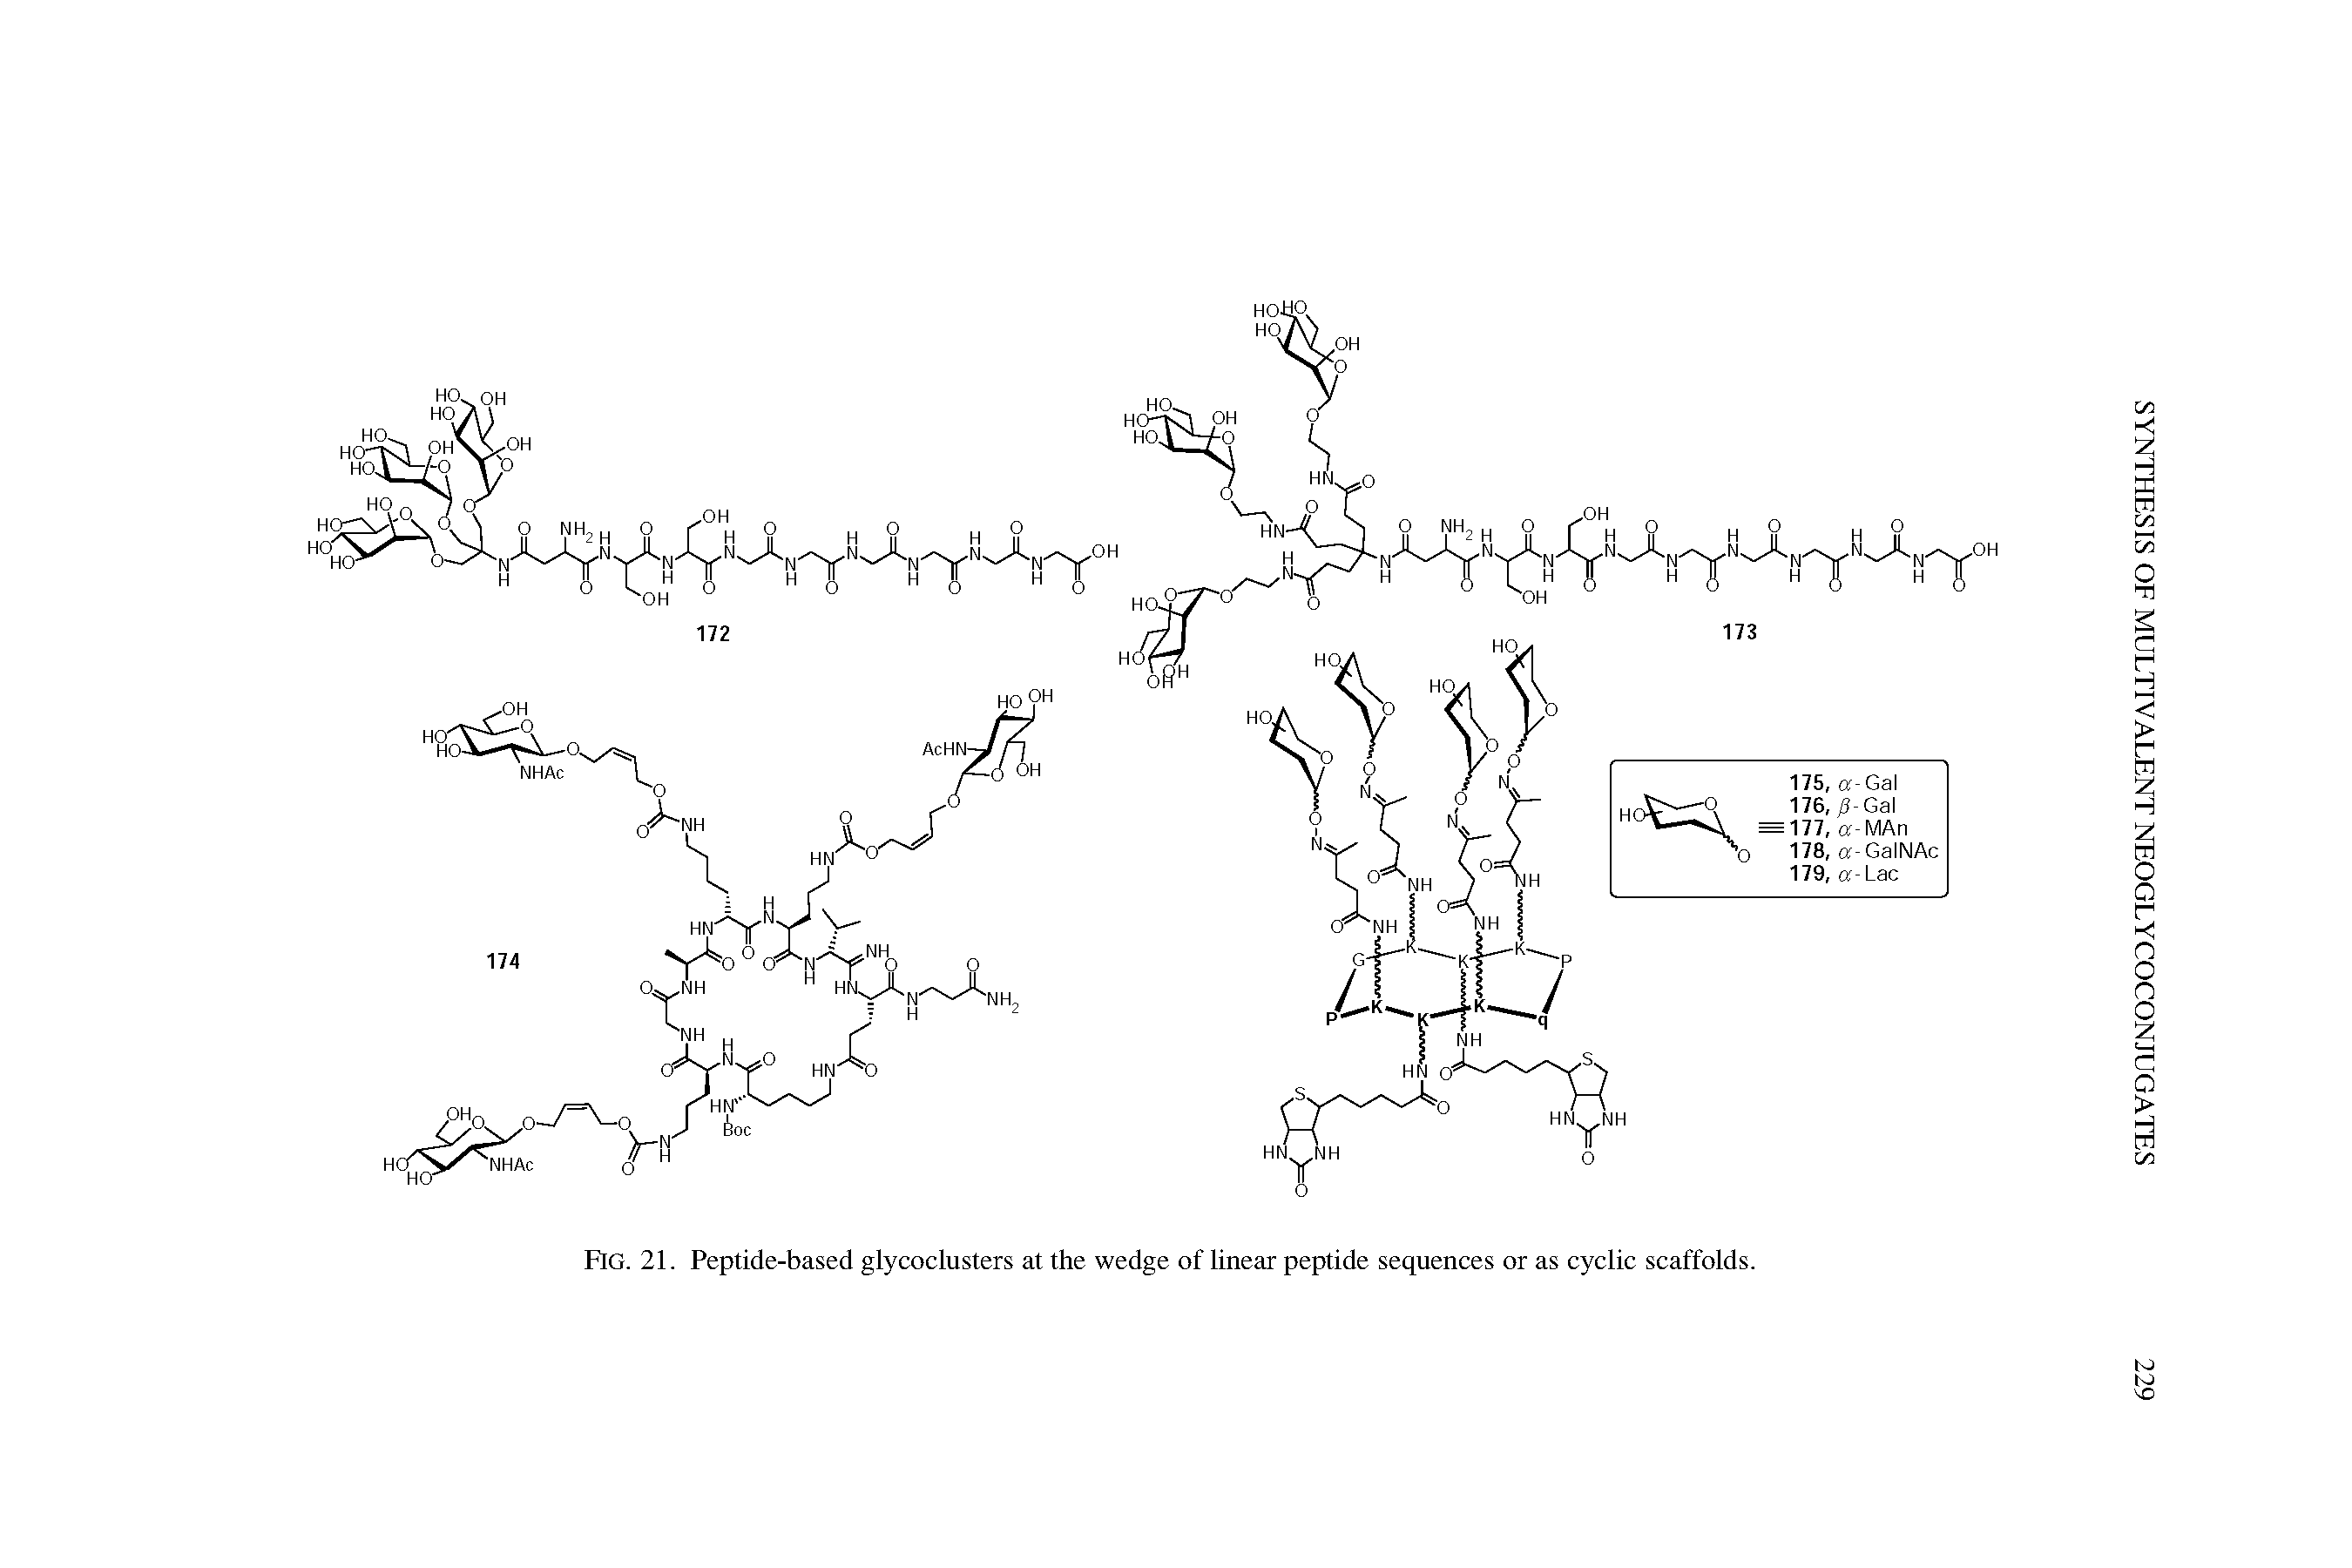 Fig. 21. Peptide-based glycoclusters at the wedge of linear peptide sequences or as cyclic scaffolds.